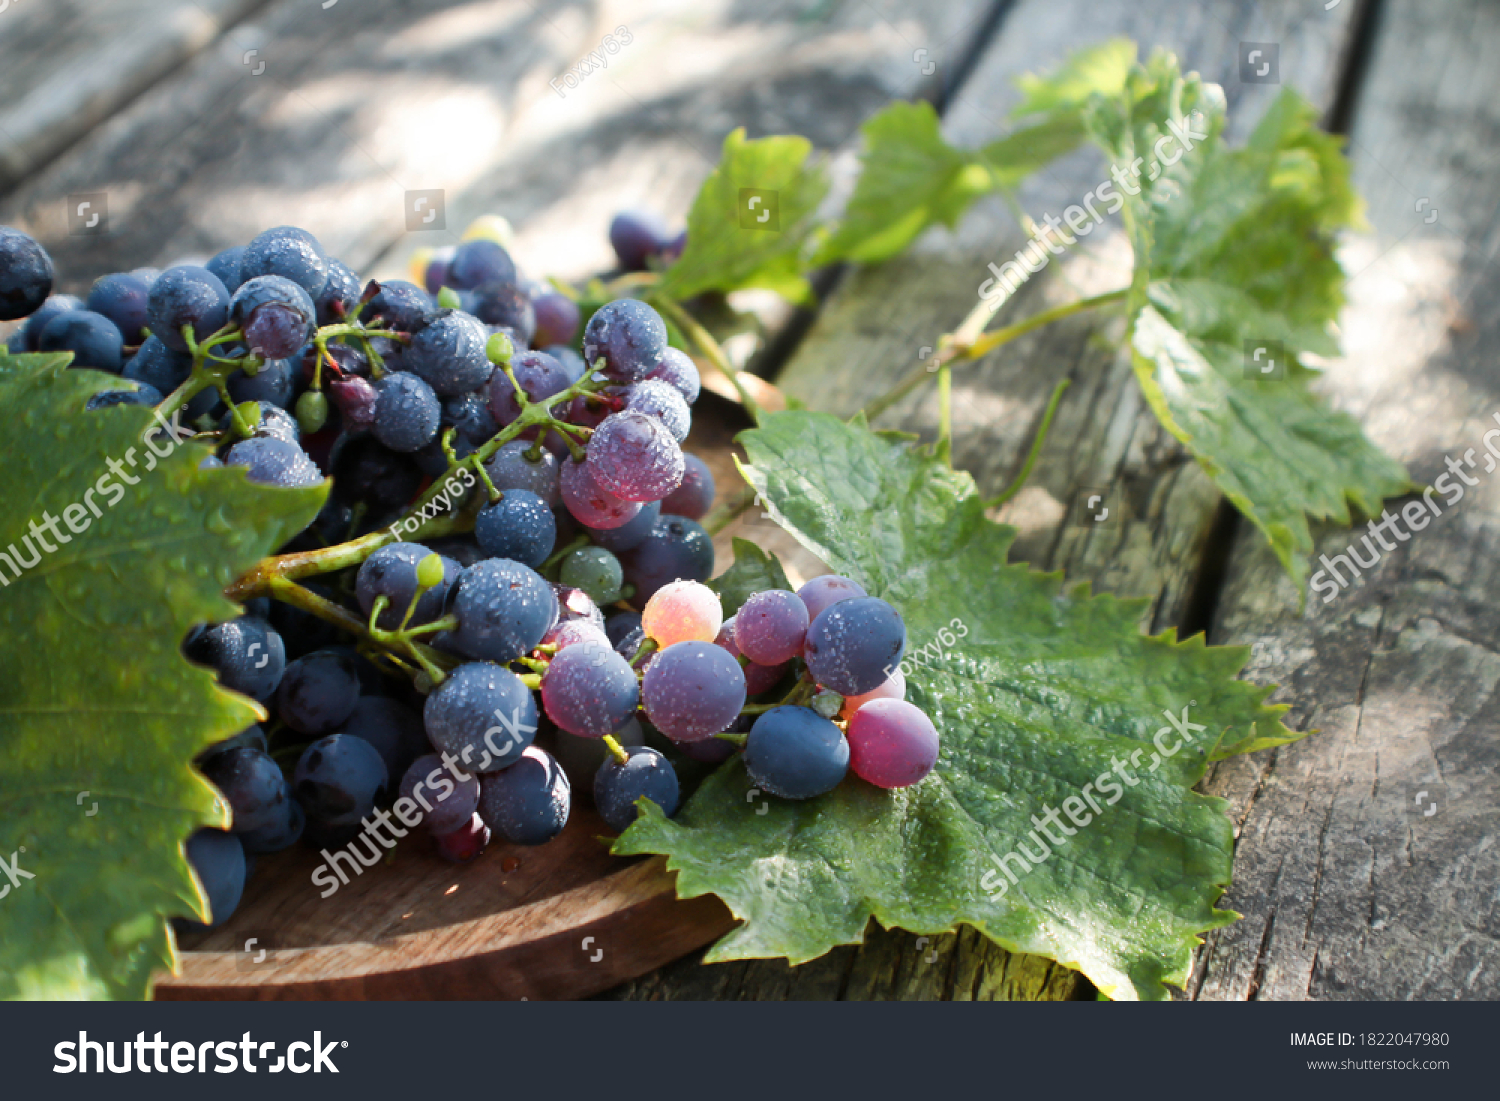 bunches of blue grapes in dewdrops and , selective focus #1822047980